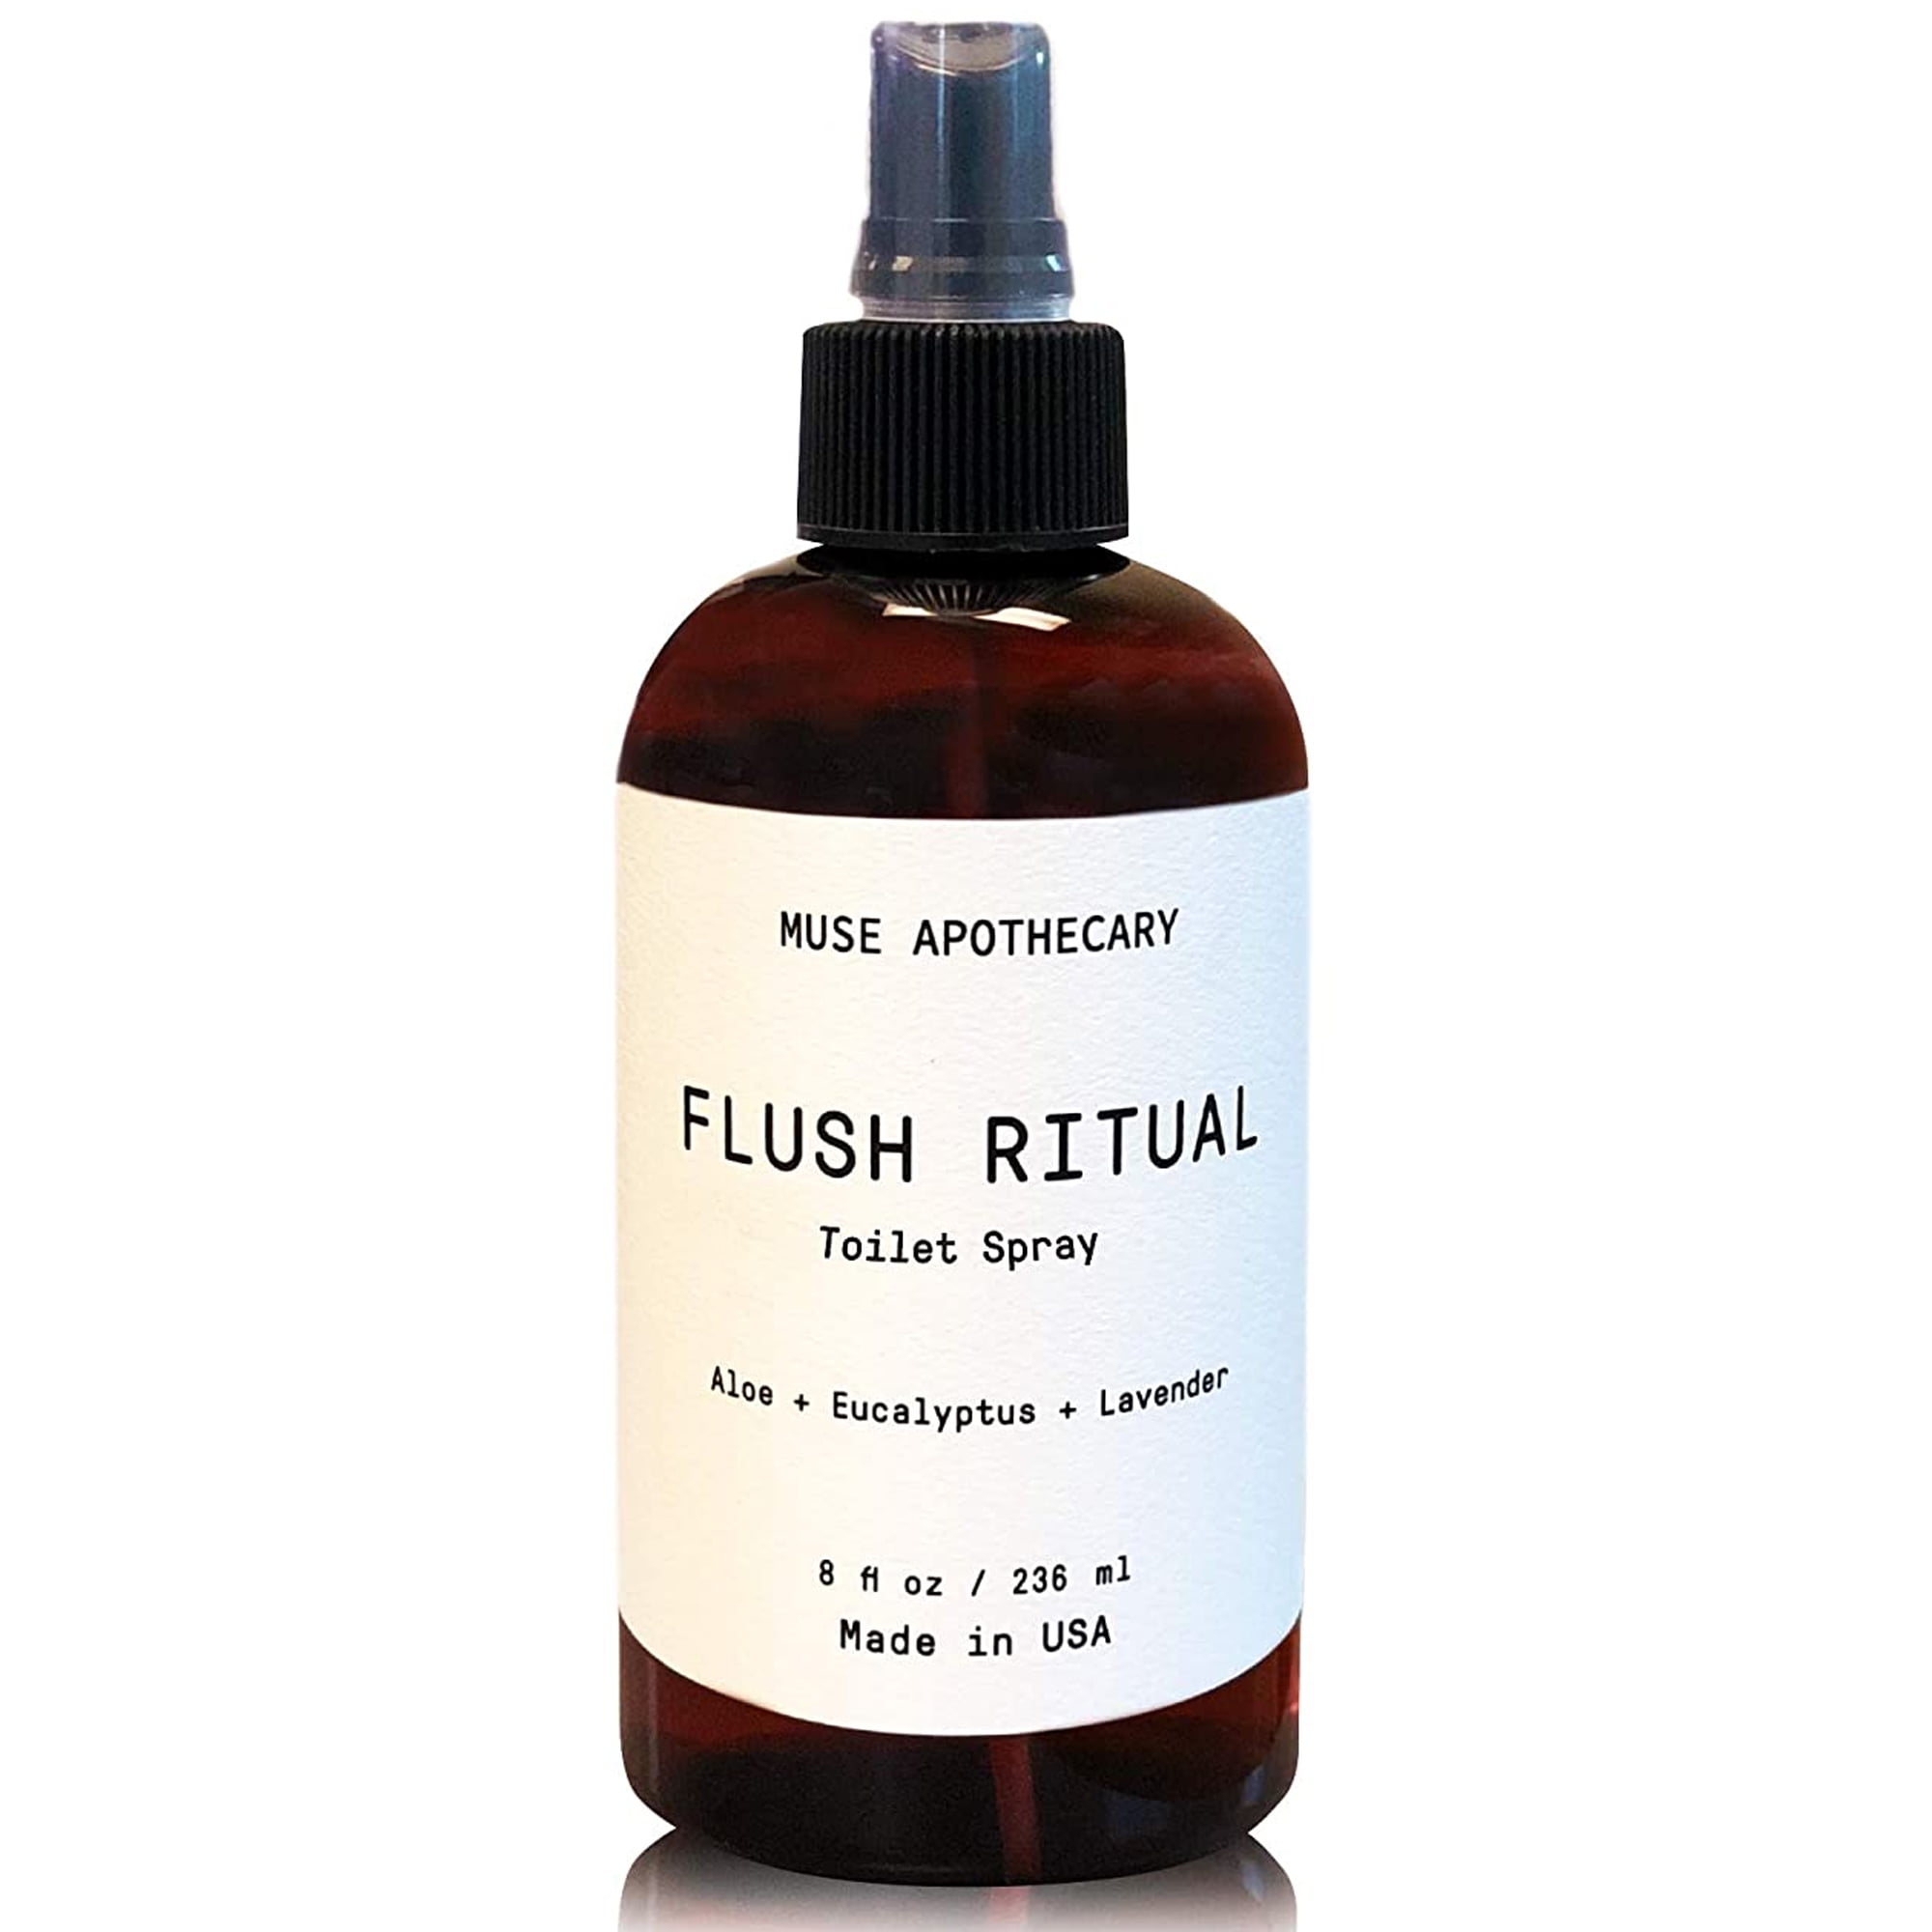 Muse Apothecary Flush Ritual - Botanical Collection - Aromatic & Refreshing  Toilet Spray, Use Before You Go, Infused with Natural Aromatherapy